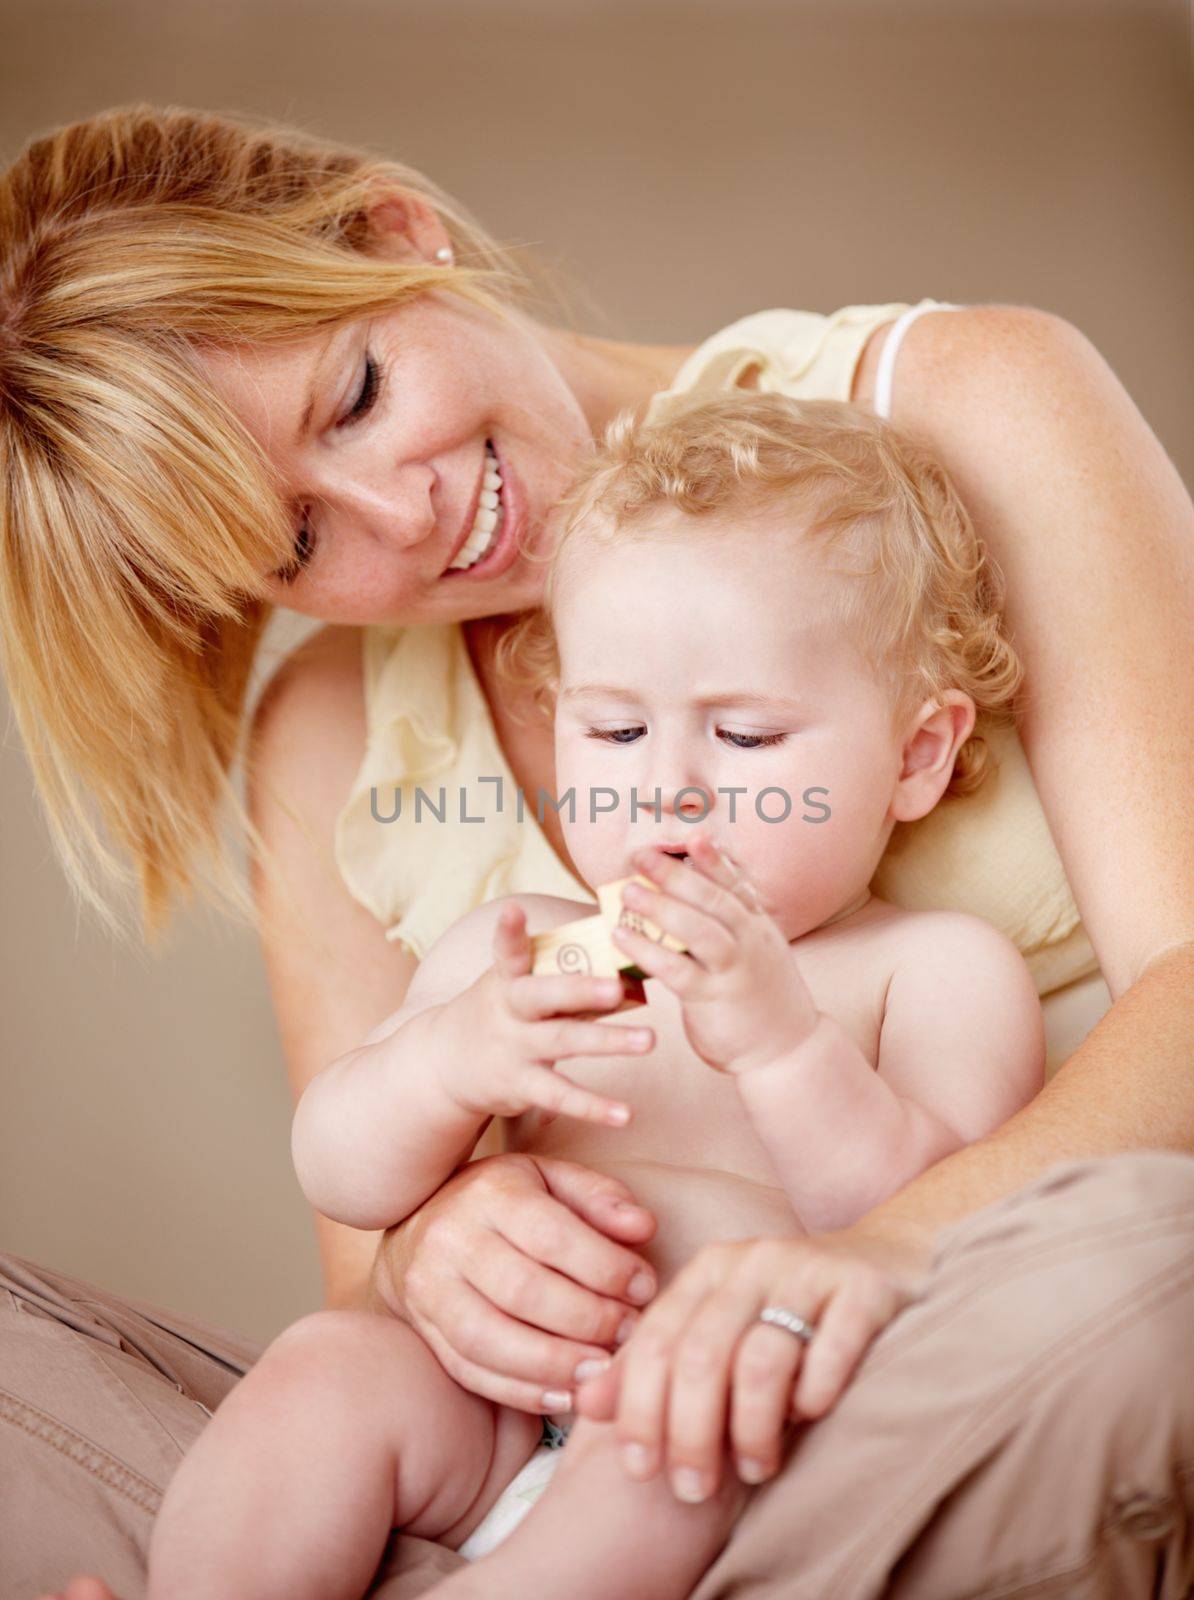 Proud of her little boy. Cute baby boy being held by his smiling mother while holding something